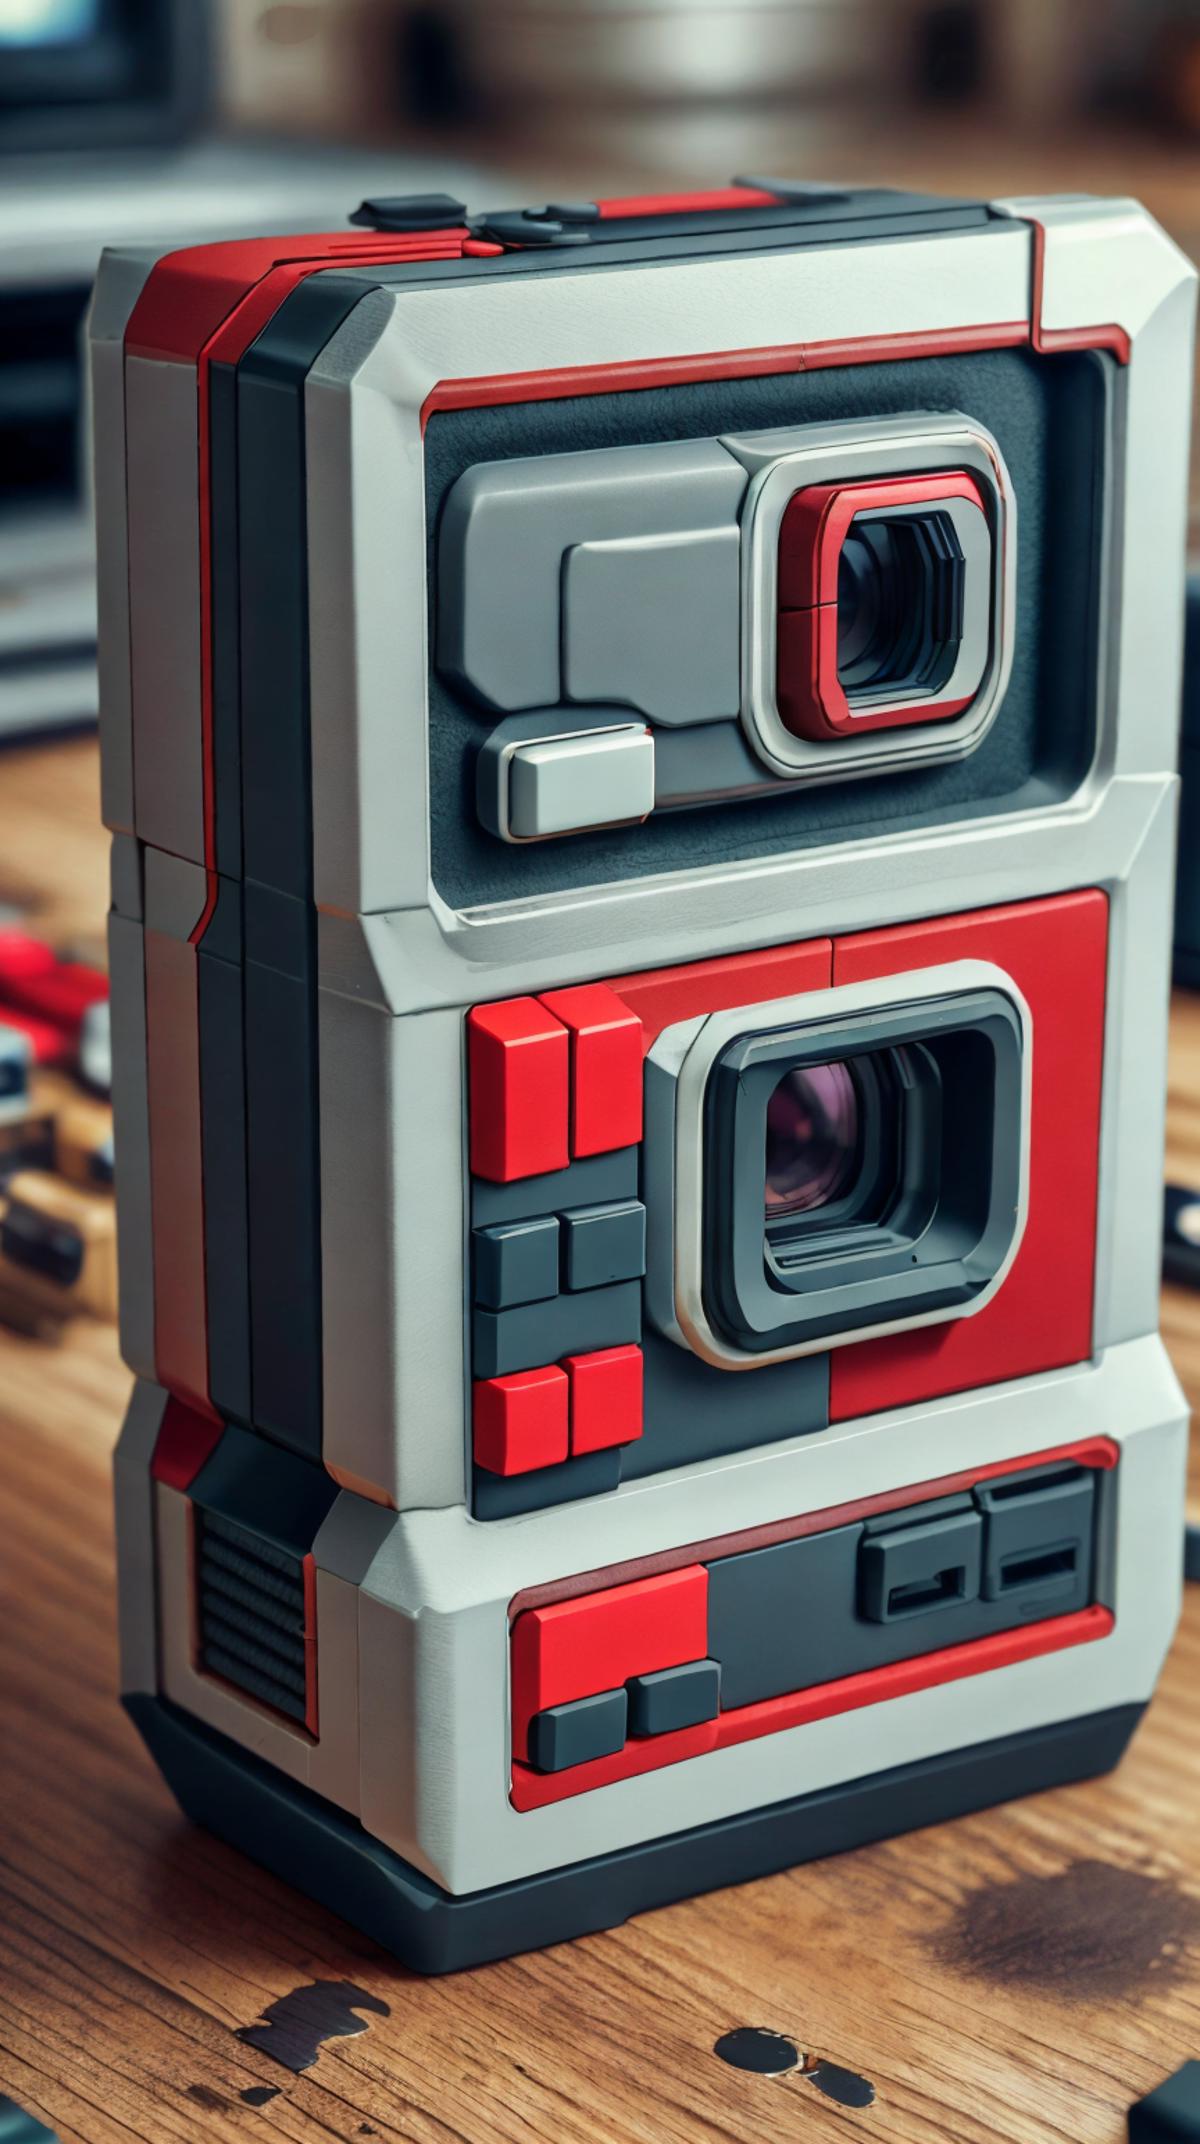 NES-Style - Turn anything into Nintendo Entertainment System! image by mnemic